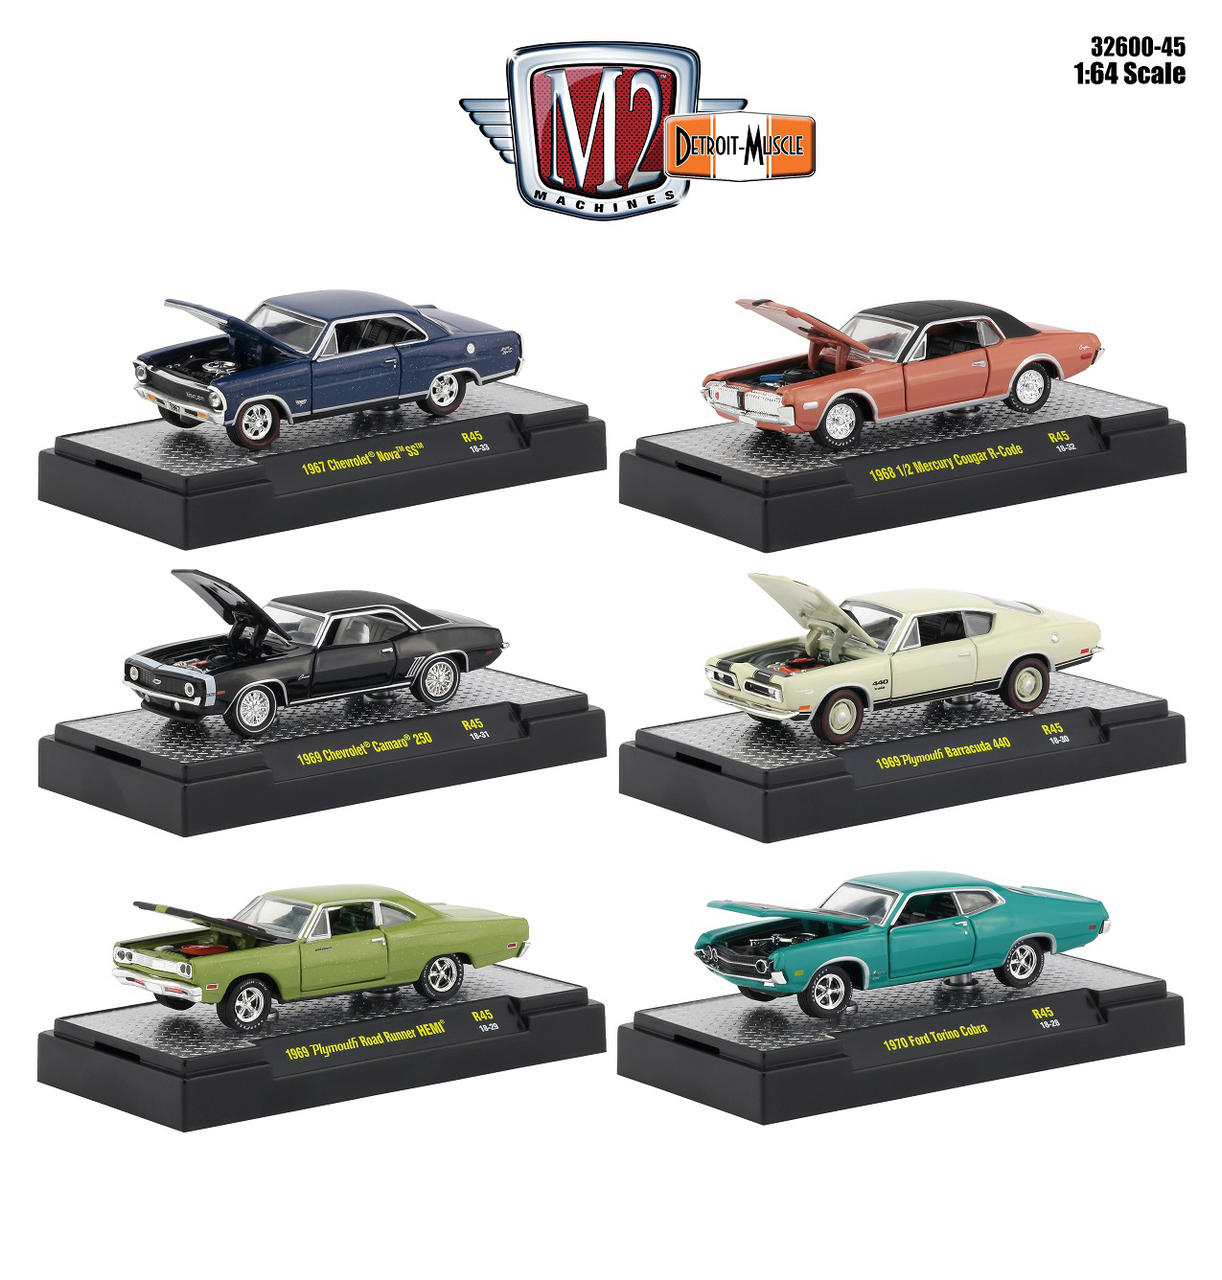 Detroit Muscle 6 Cars Set Release 45 In Display Cases 1/64 Diecast Model Cars By M2 Machines